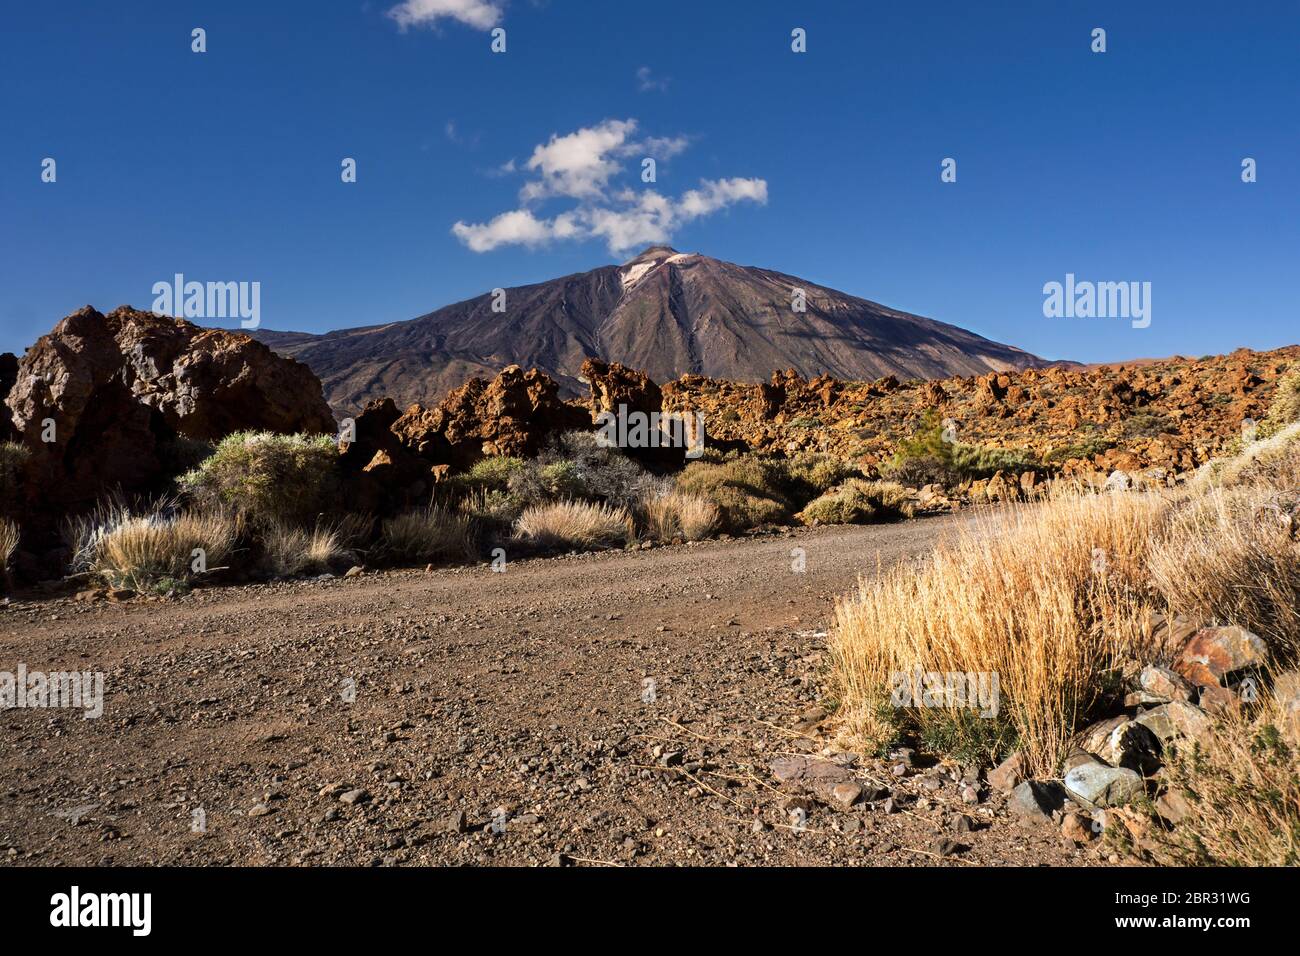 El Teide, Spain's highest mountain on teneriffa, faces the viewer with its white chimney, above it a very blue sky and directly above the chimney whit Stock Photo